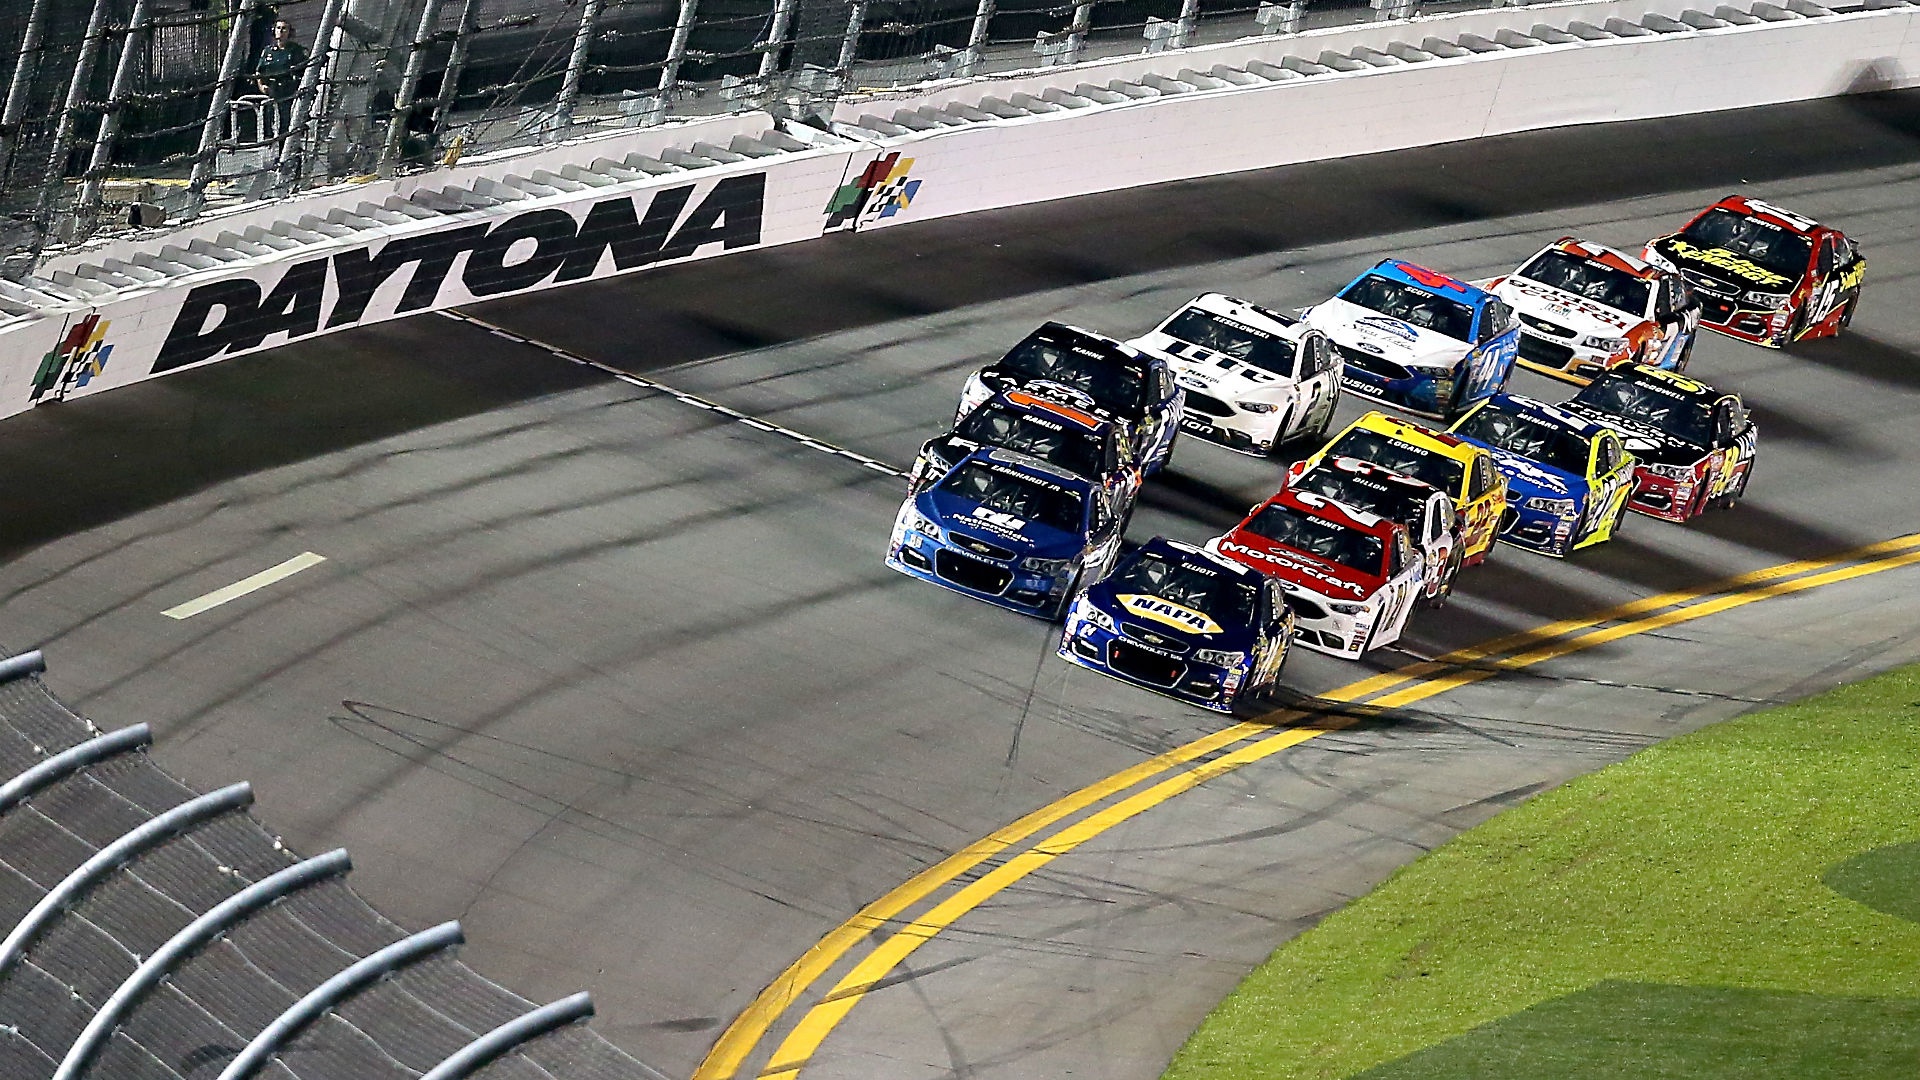 Daytona 500 Entry List shows there will be cats that go home | Tireball NASCAR News ...1920 x 1080